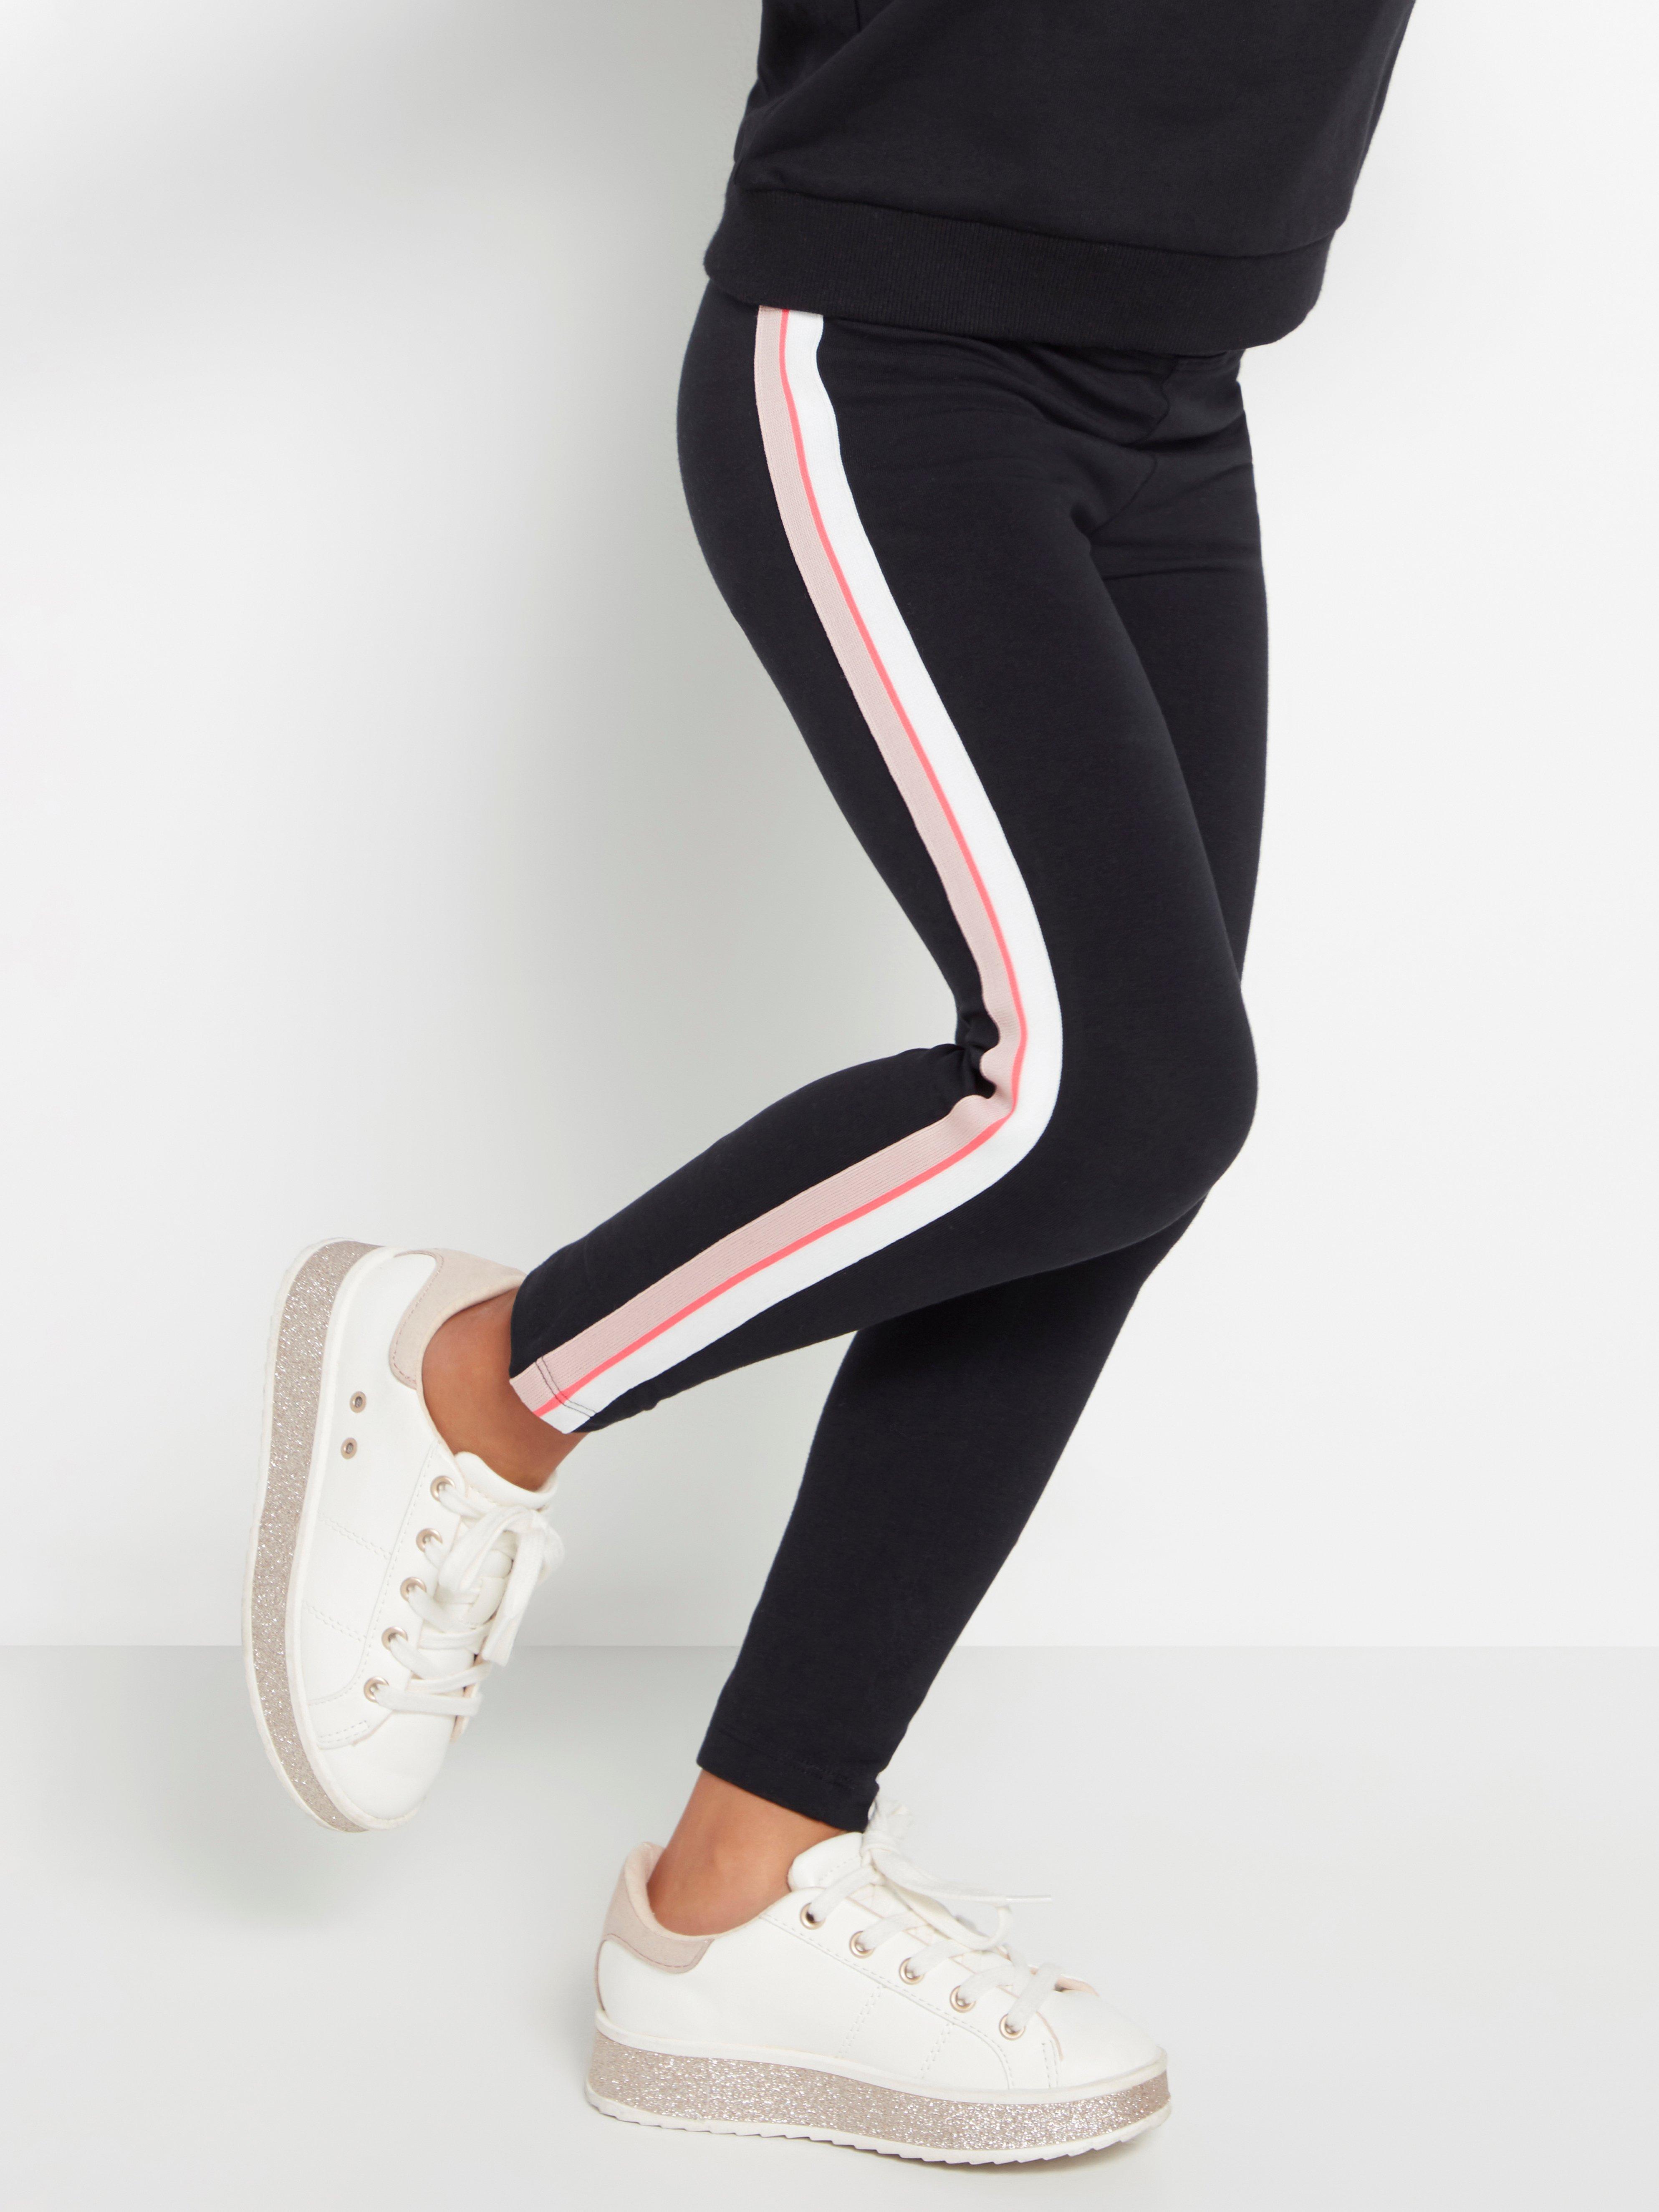 Black leggings with pink and white side stripes